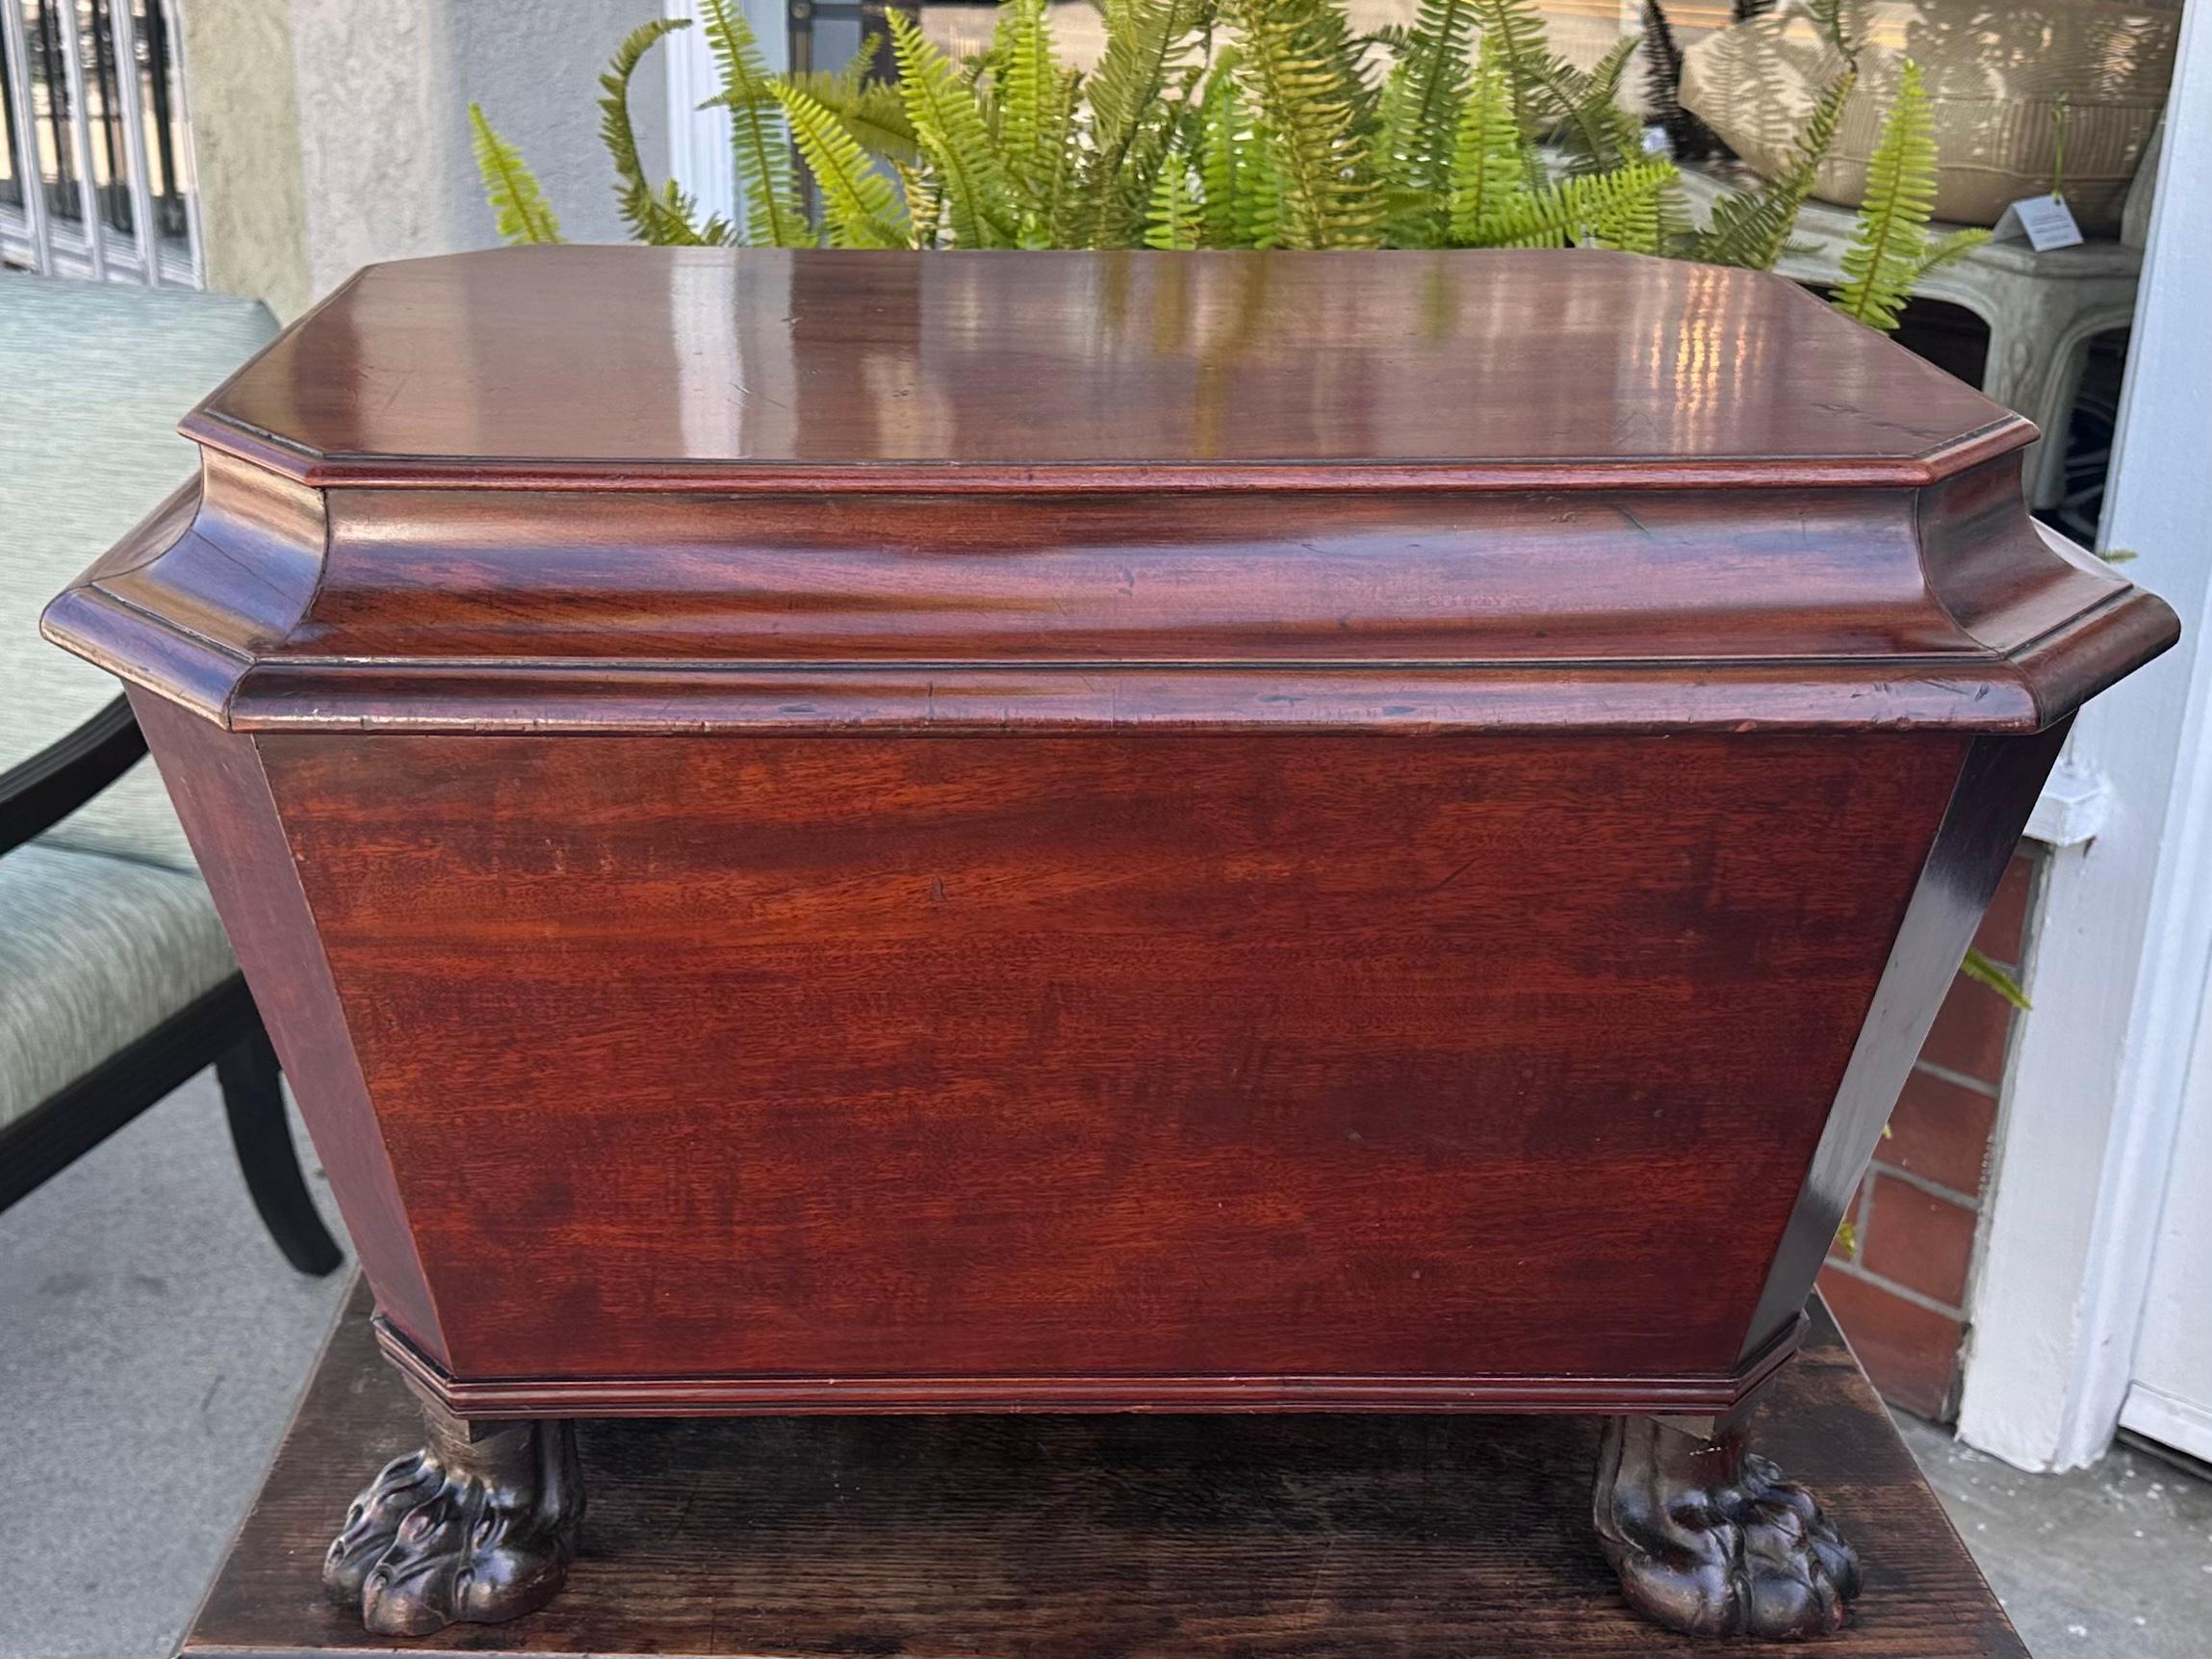 Antique Regency Mahogany Sarcophagus Form Cellarette with Original Liner In Good Condition For Sale In LOS ANGELES, CA